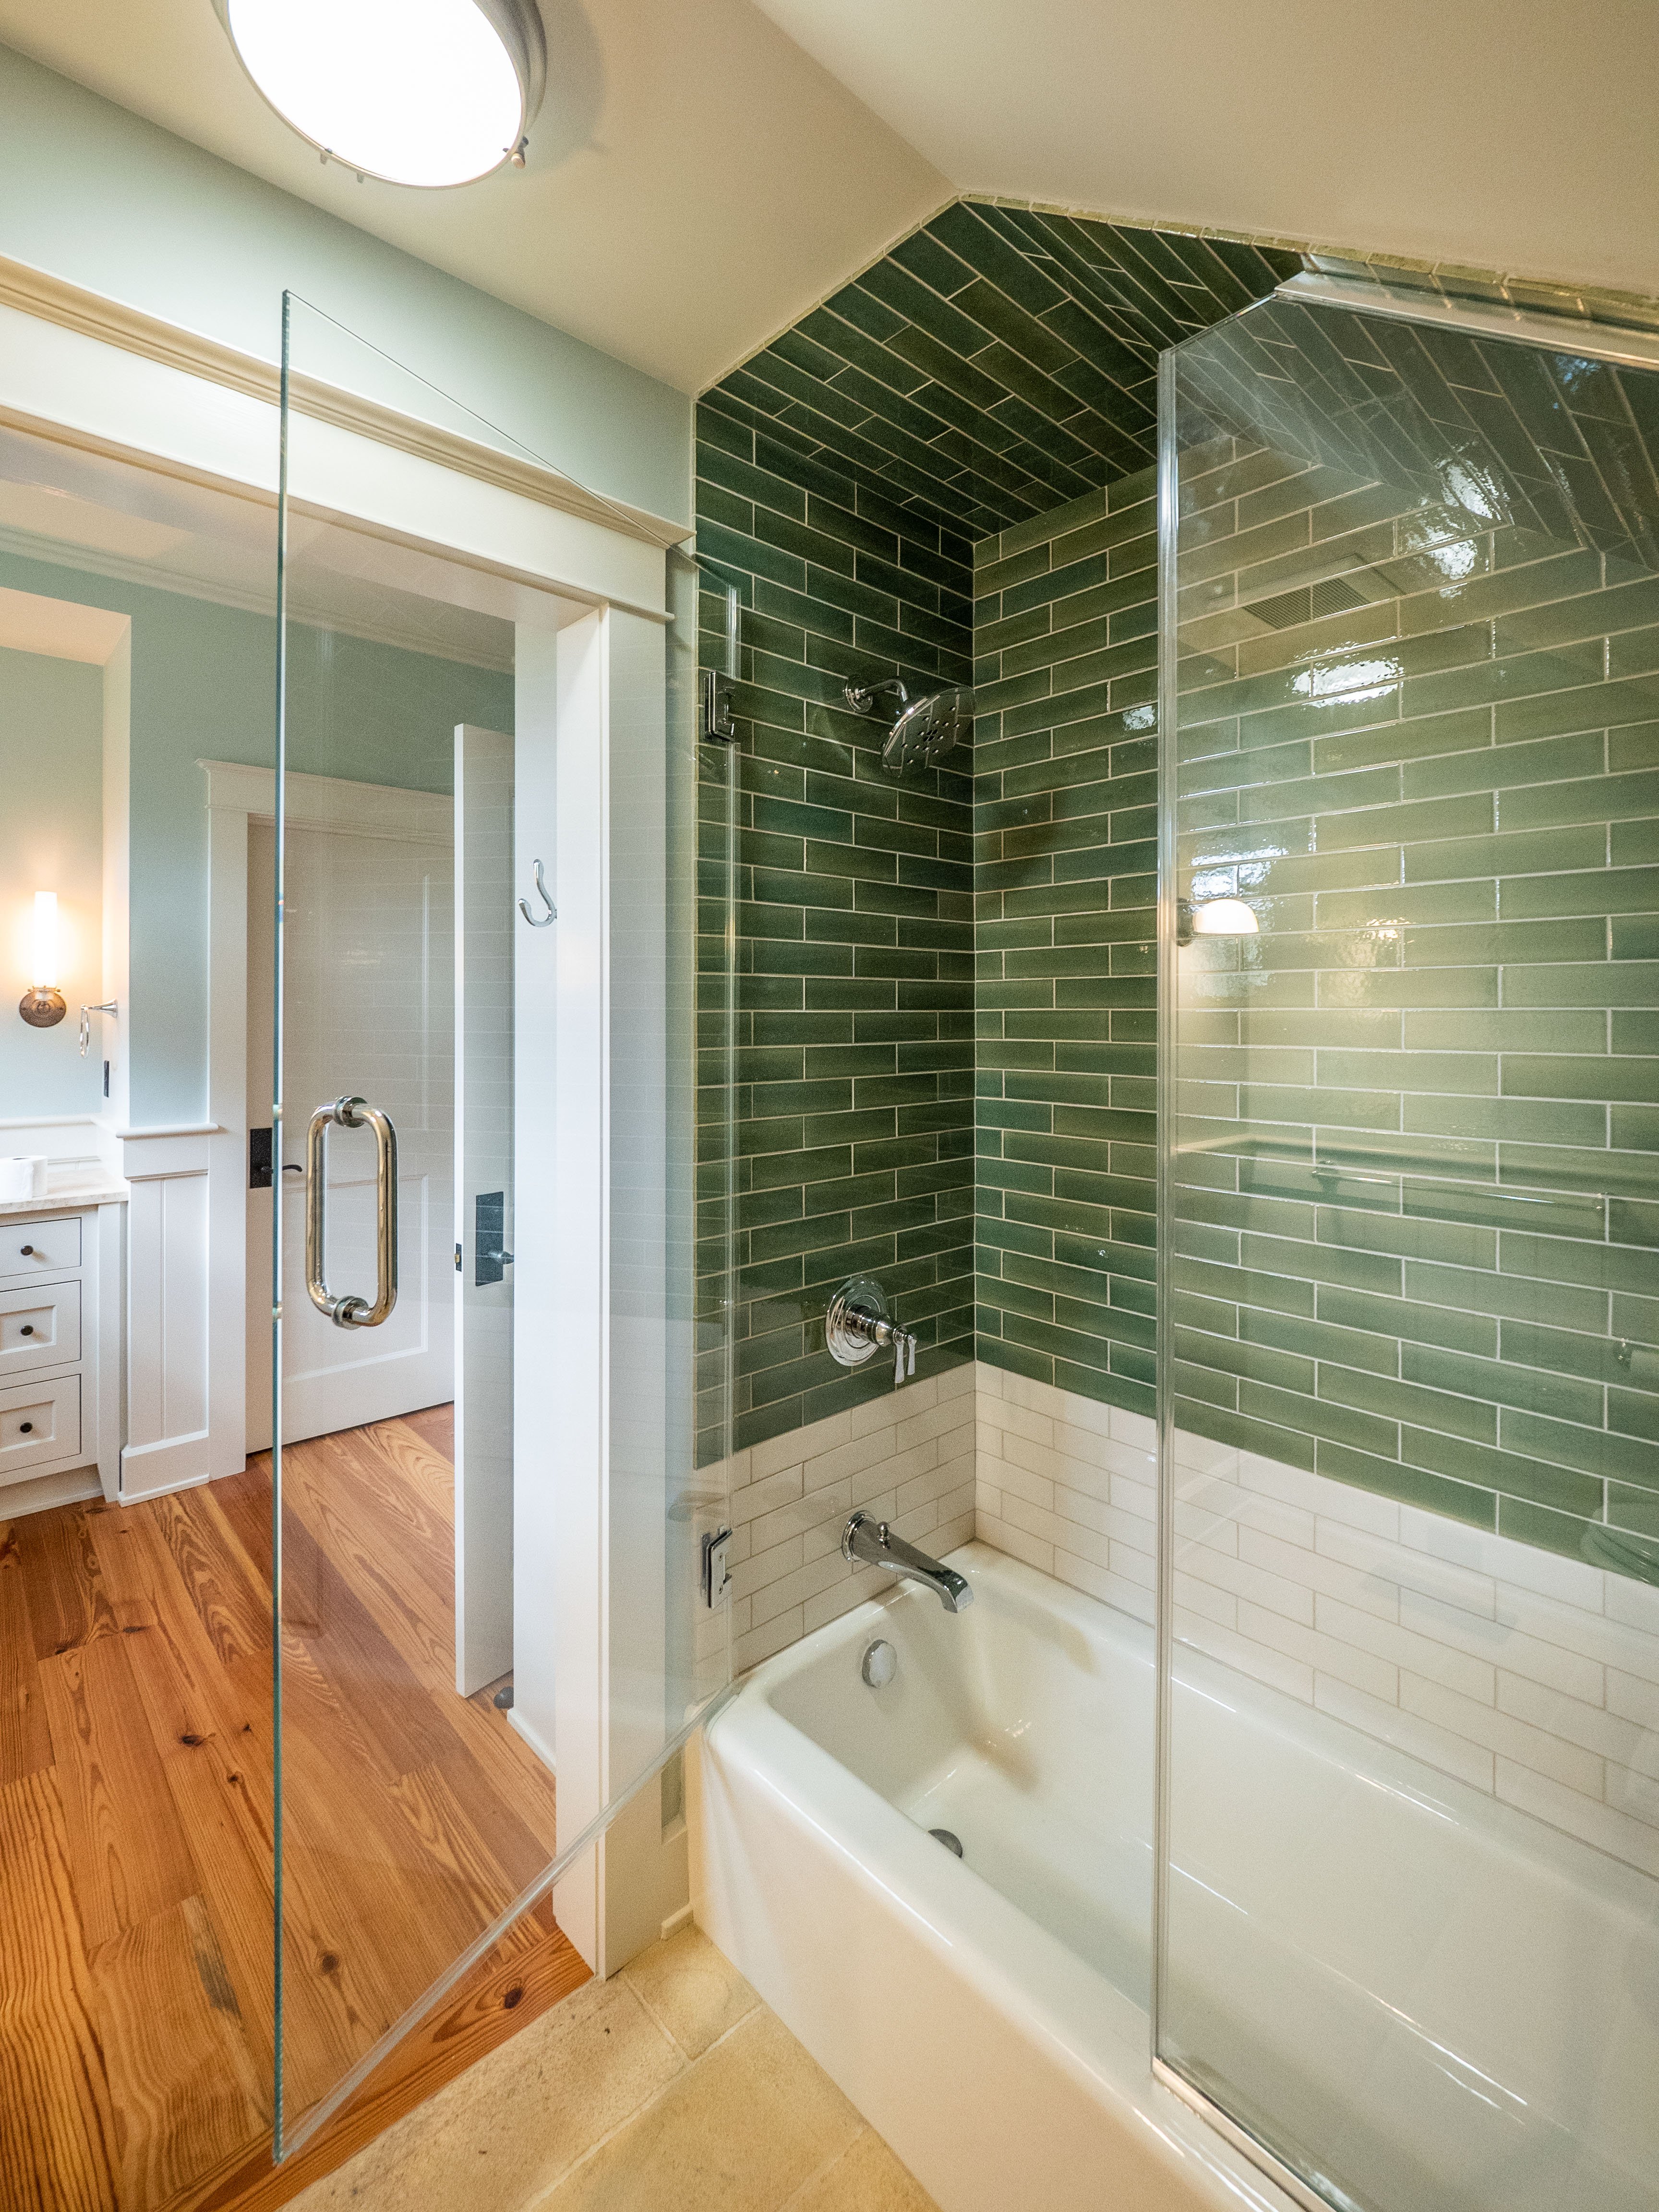 Bathroom with shower, tub, glass doors, and bold green subway tile.